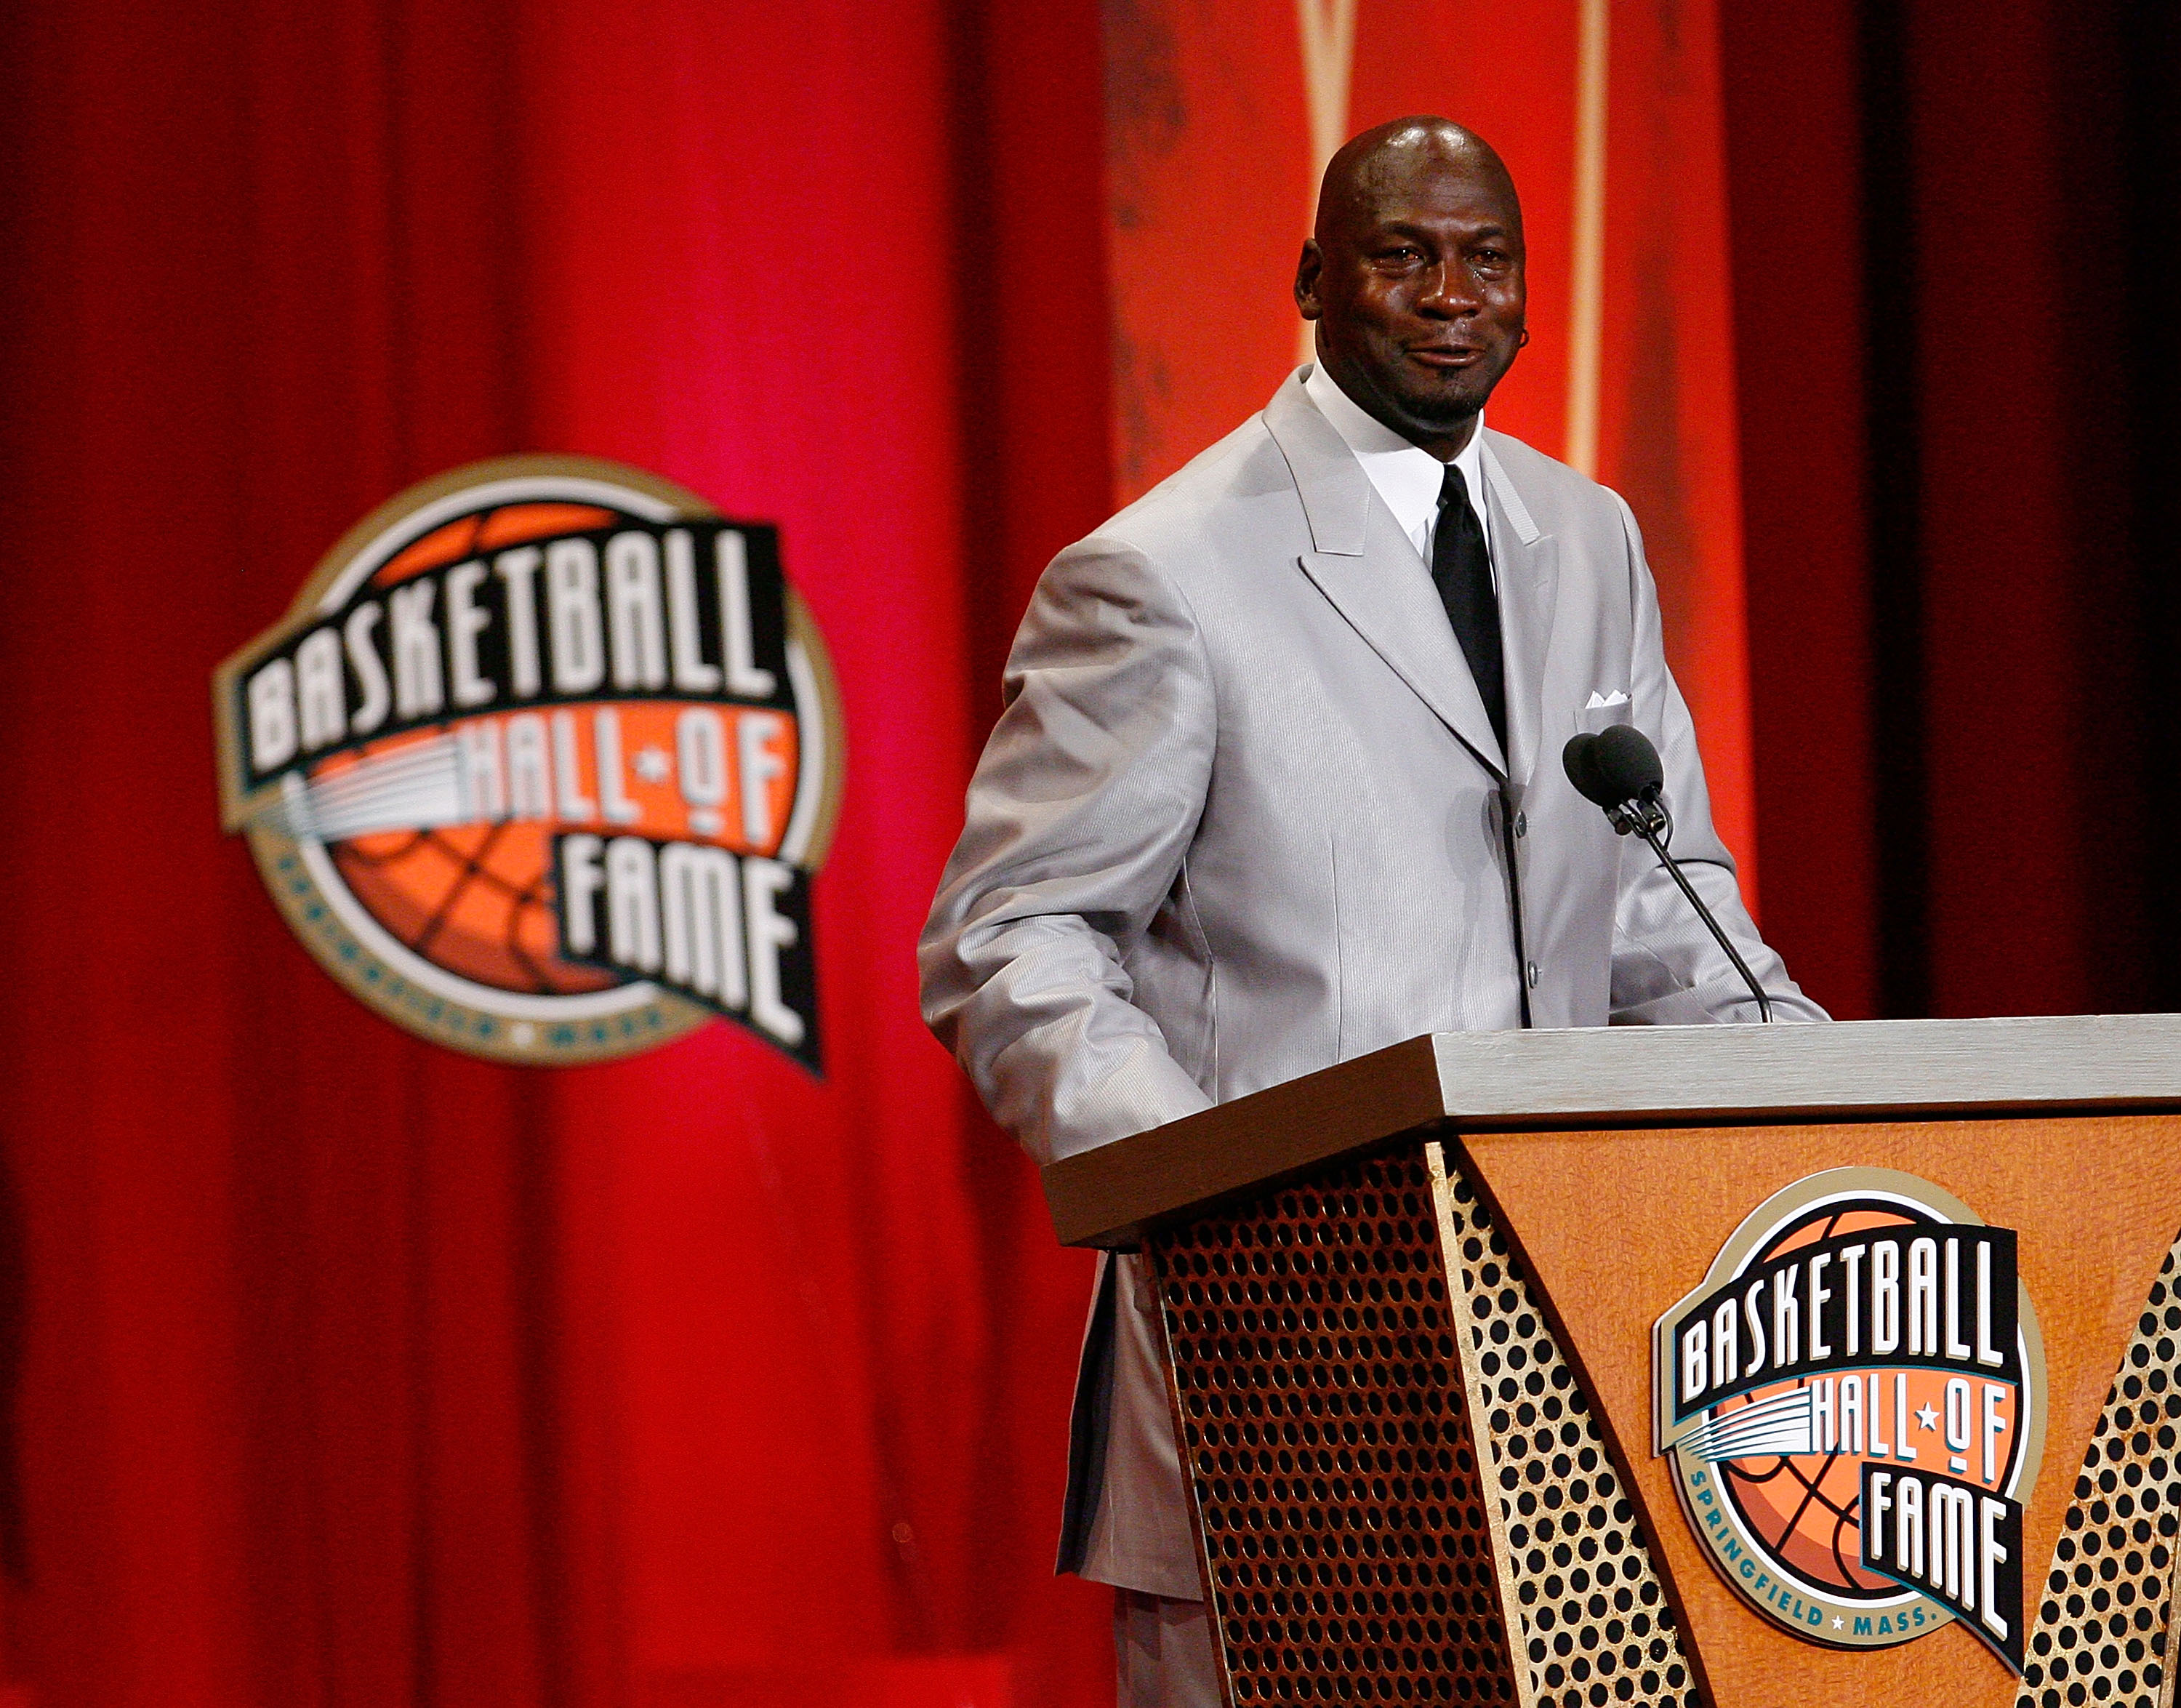 SPRINGFIELD, MA - SEPTEMBER 11: Michael Jordan to the Naismith Memorial Basketball Hall of Fame speaks during an induction ceremony on September 11, 2009 in Springfield, Massachusetts. NOTE TO USER: User expressly acknowledges and agrees that, by download